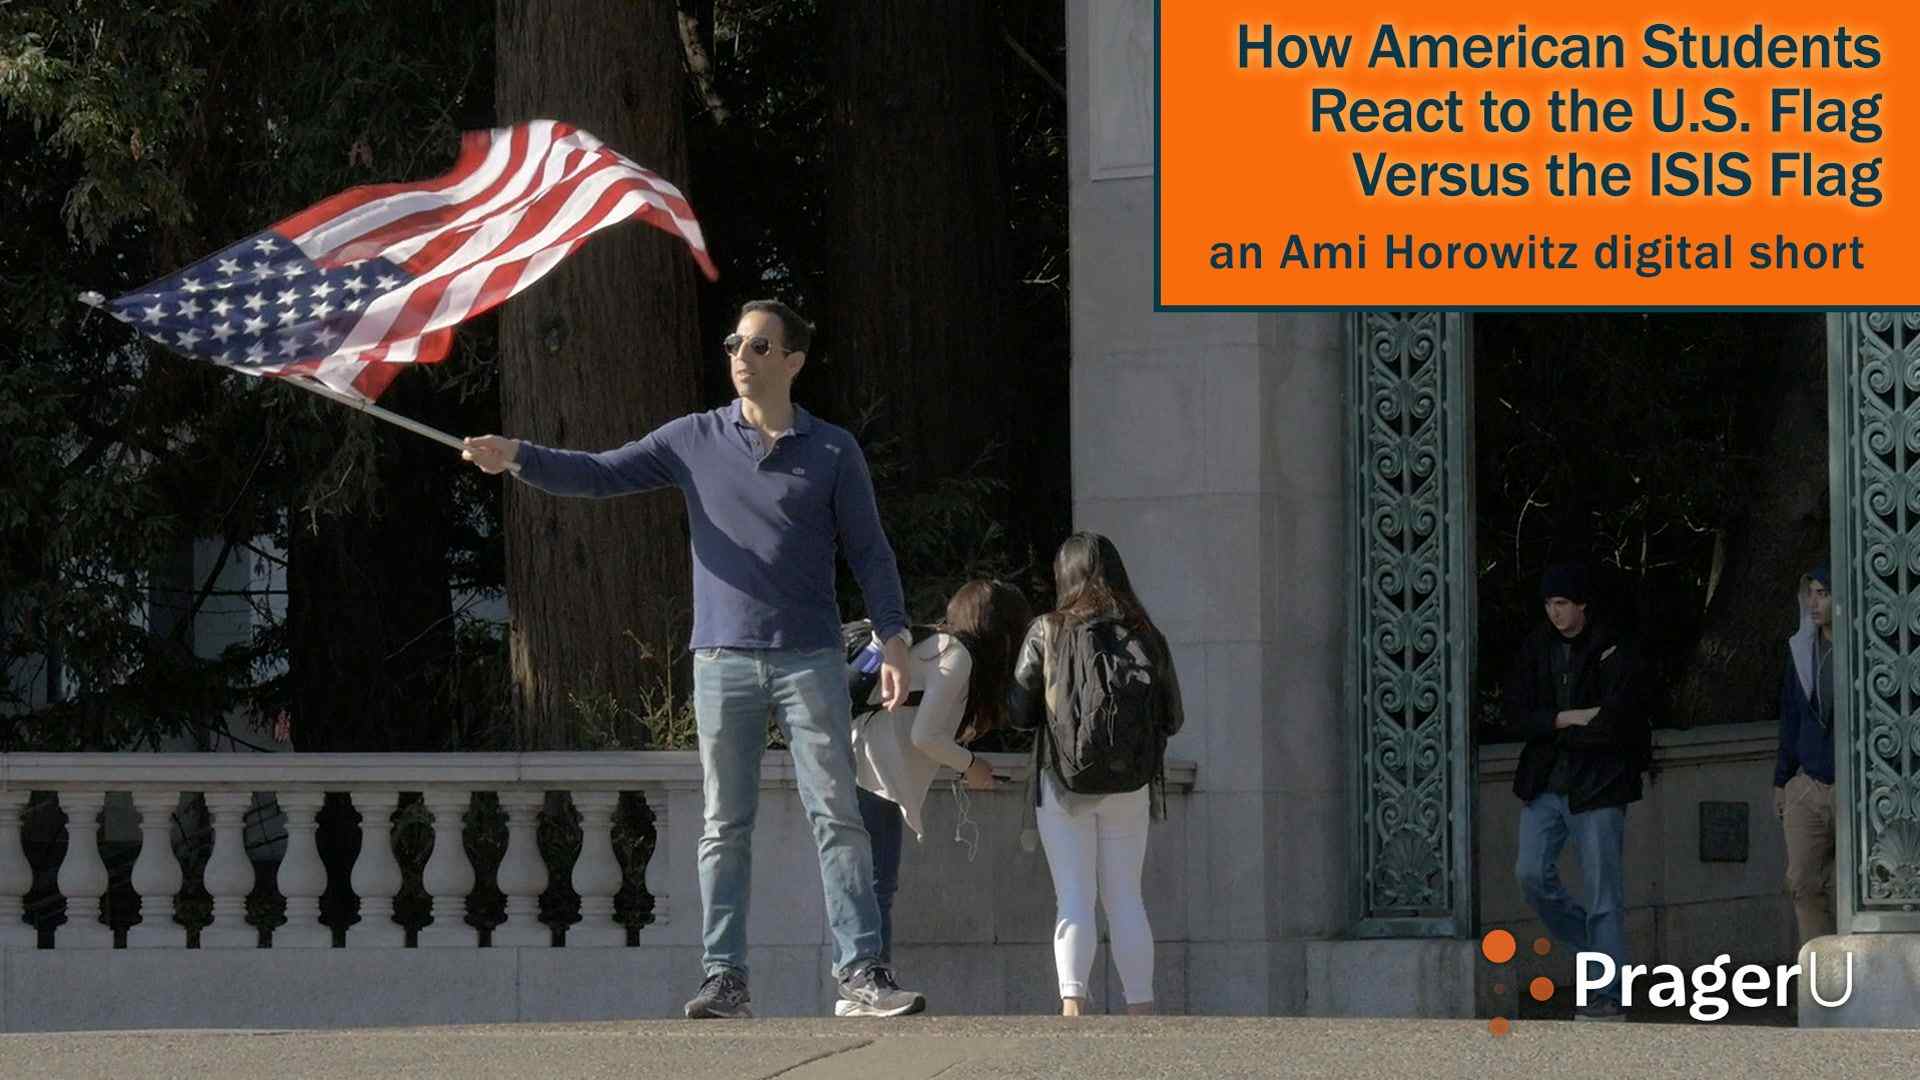 How American Students React to the U.S. Flag Versus the ISIS Flag